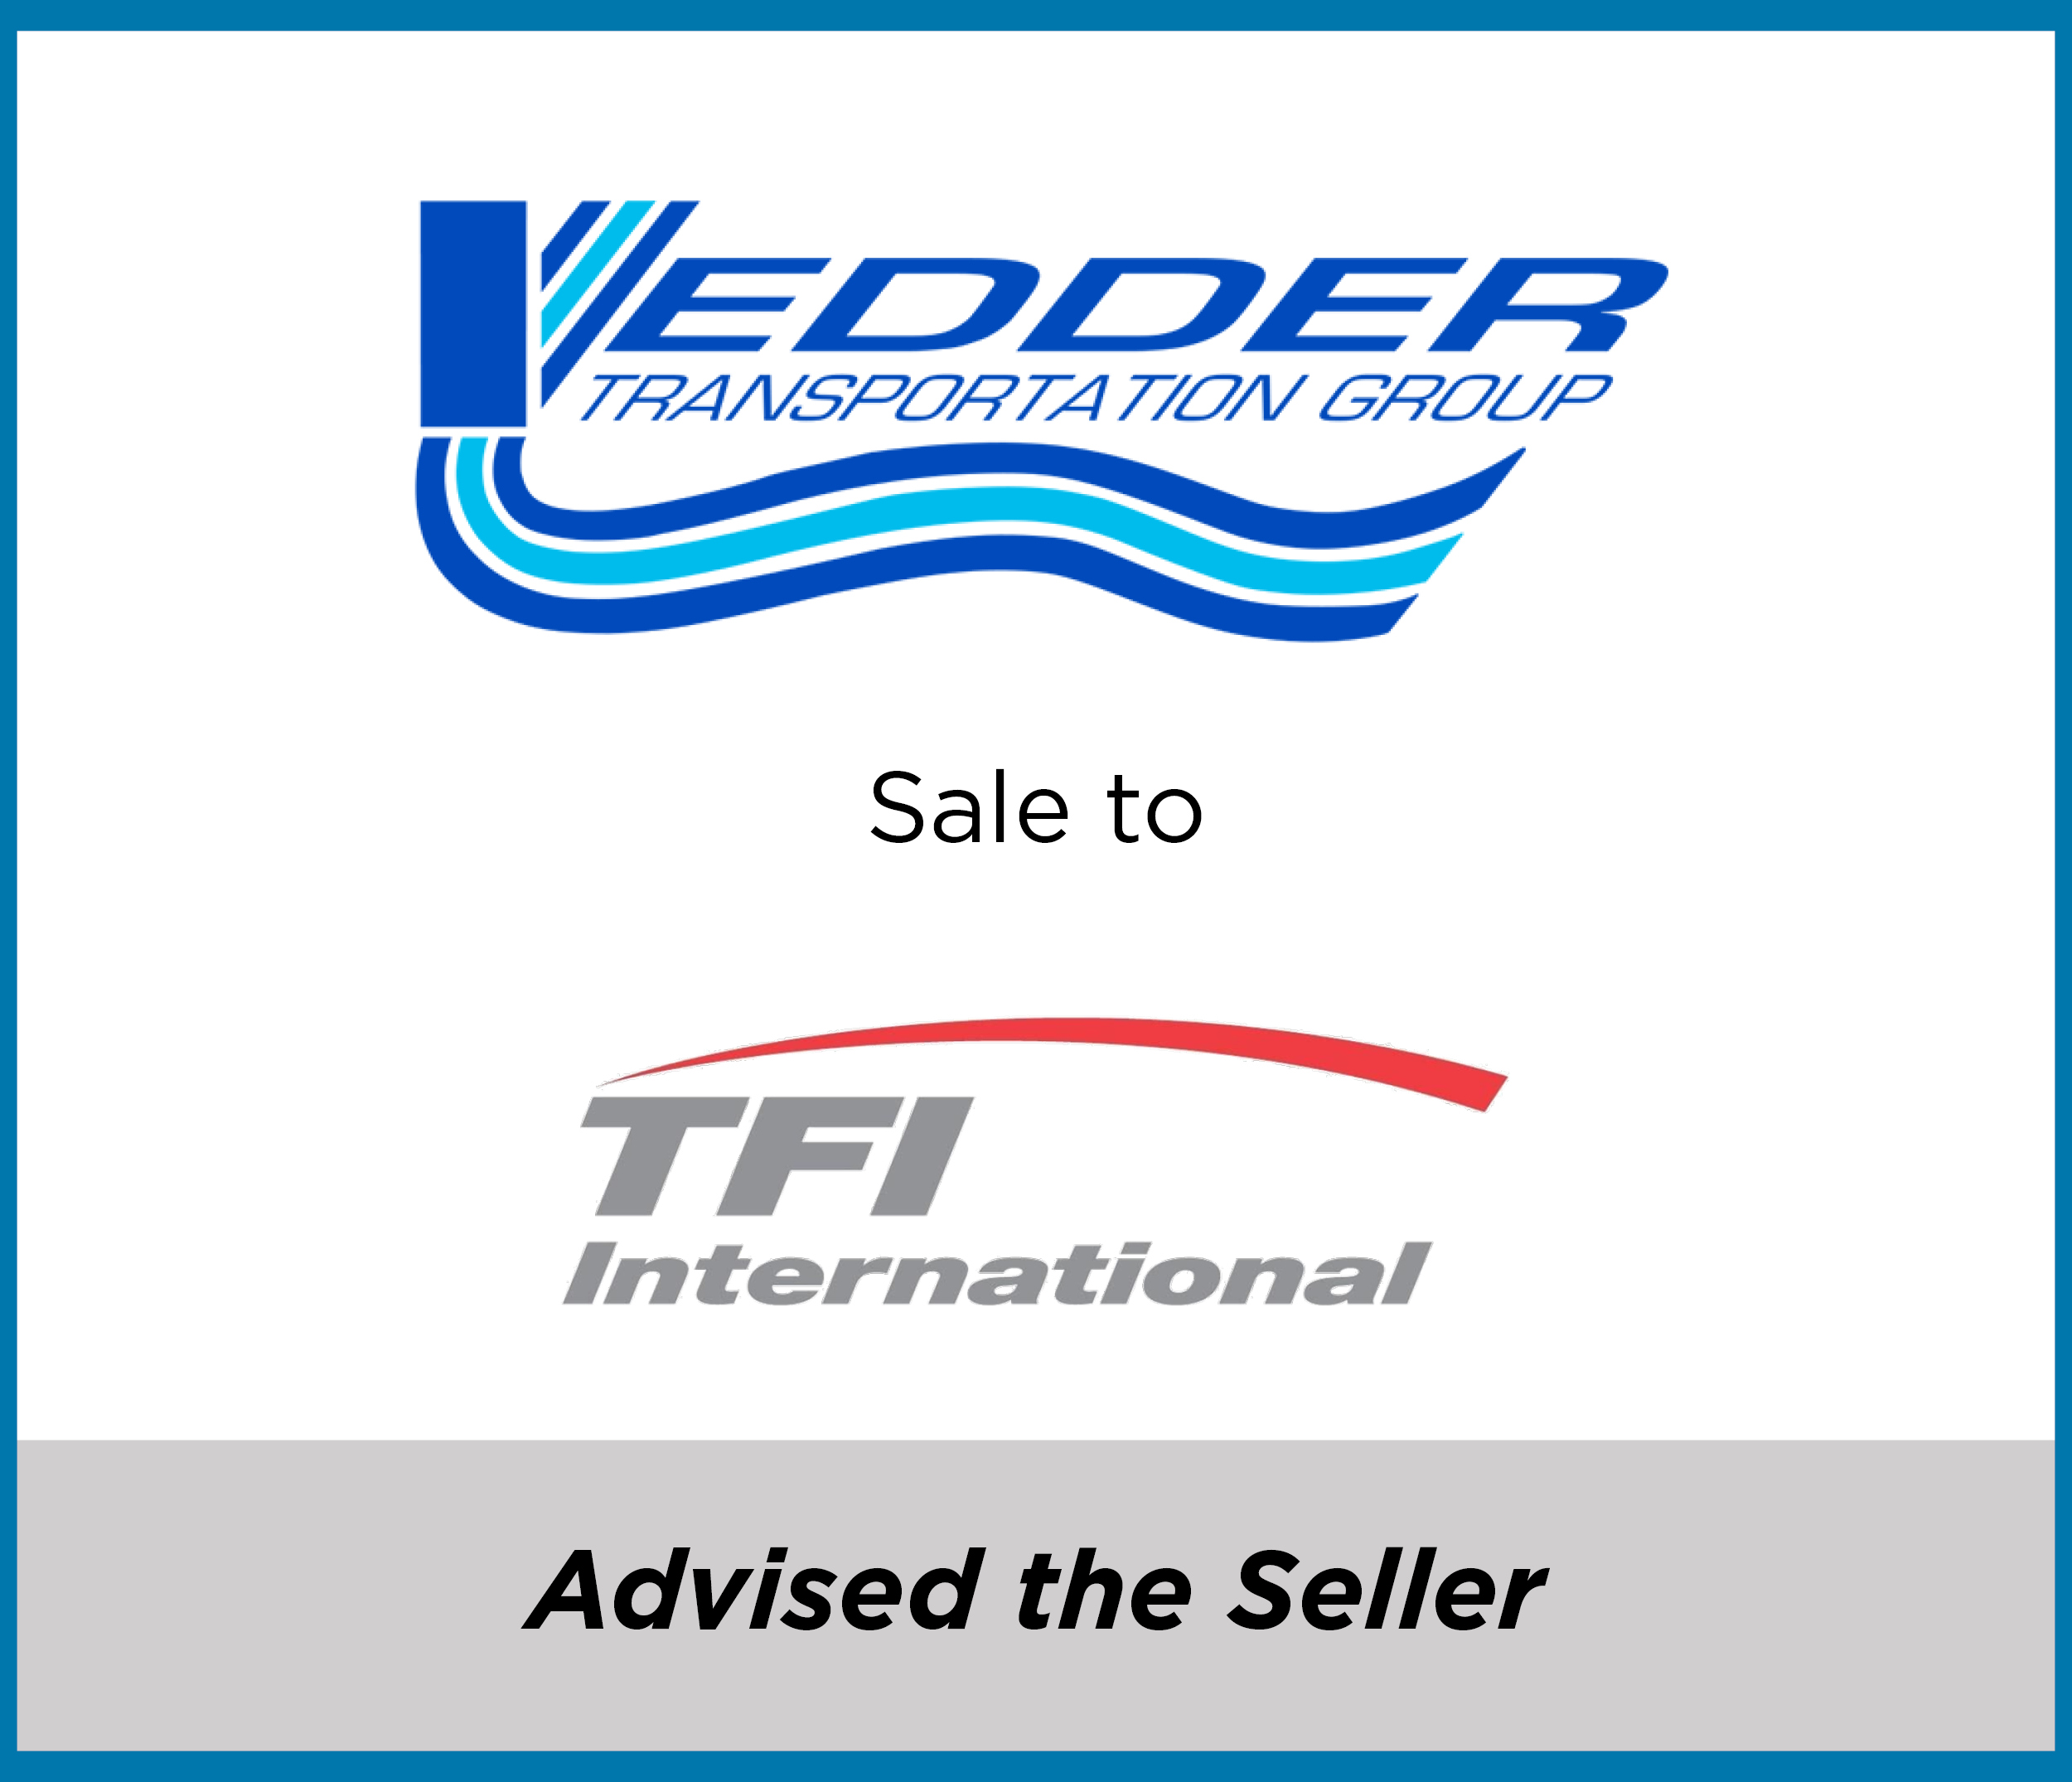 Vedder Transportation Group sale to TFI International | Capital West Partners - Western Canada's Independent M&A Advisors